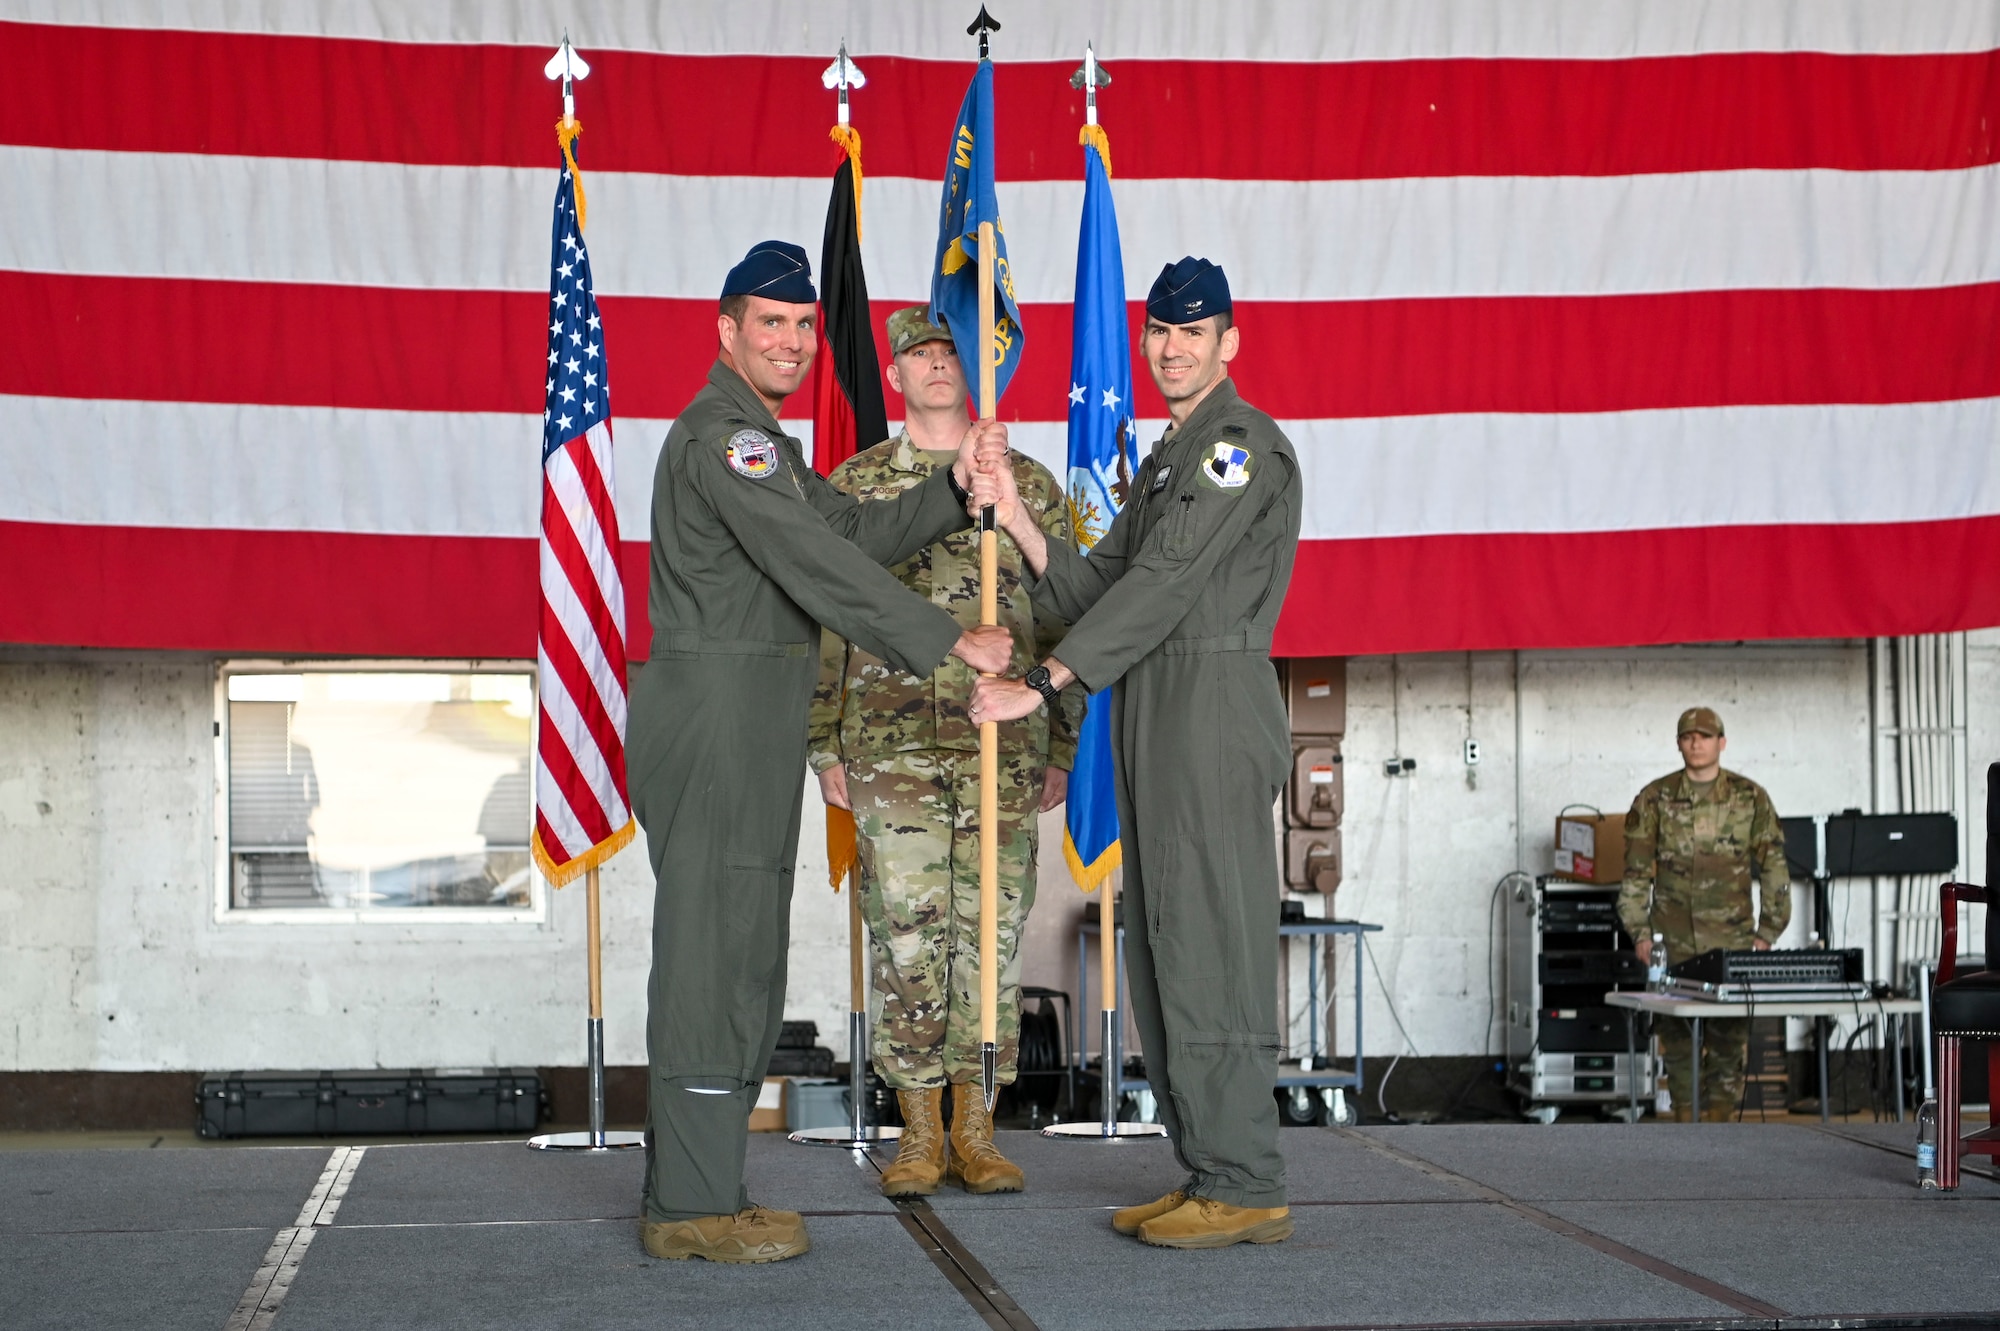 Col. Thomas Graham, right, assumes command of the 52nd Operations Group from Col. Leslie Hauck, 52nd Fighter Wing commander, during an assumption of command ceremony, June 28, 2022, on Spangdahlem Air Base, Germany. The ceremonial passing of the guidon is the single event which most embodies the institution and responsibility of the position of command. (U.S. Air Force photo by Senior Airman Jessica Sanchez-Chen)